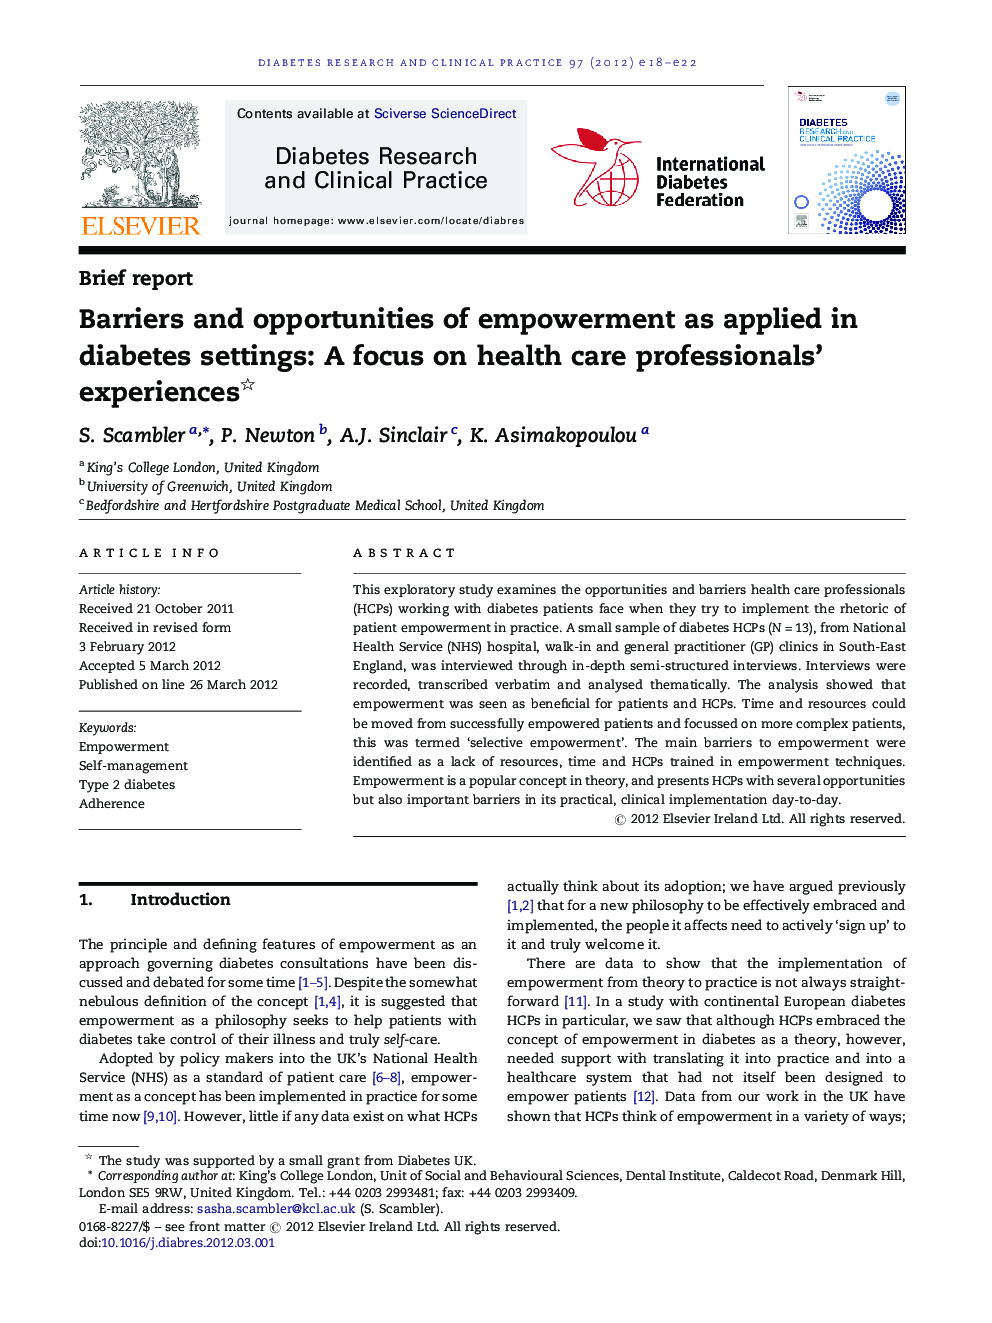 Barriers and opportunities of empowerment as applied in diabetes settings: A focus on health care professionals' experiences